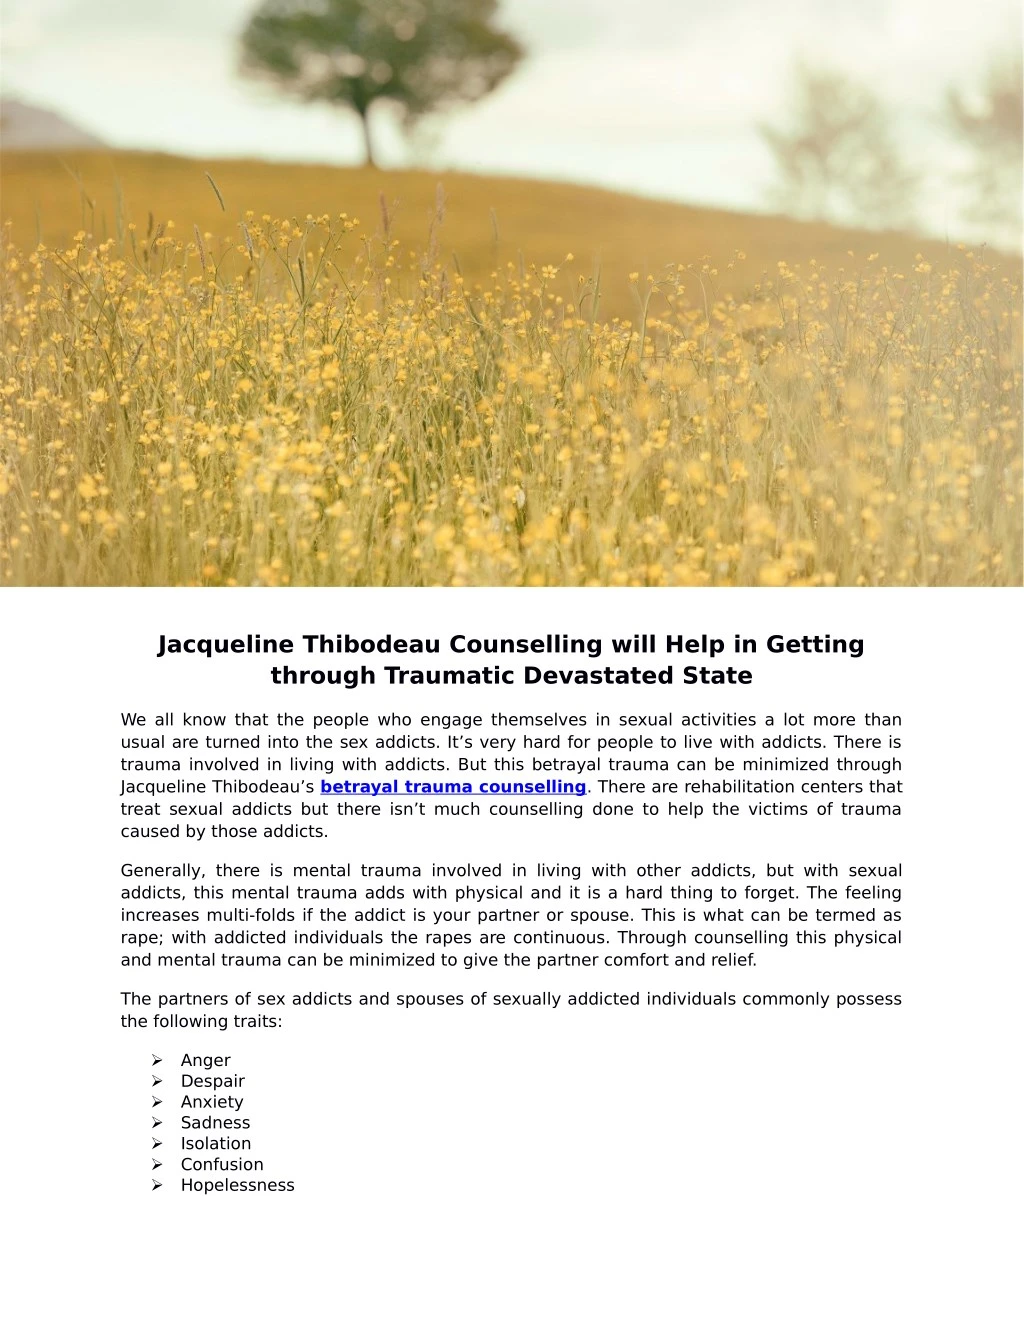 jacqueline thibodeau counselling will help